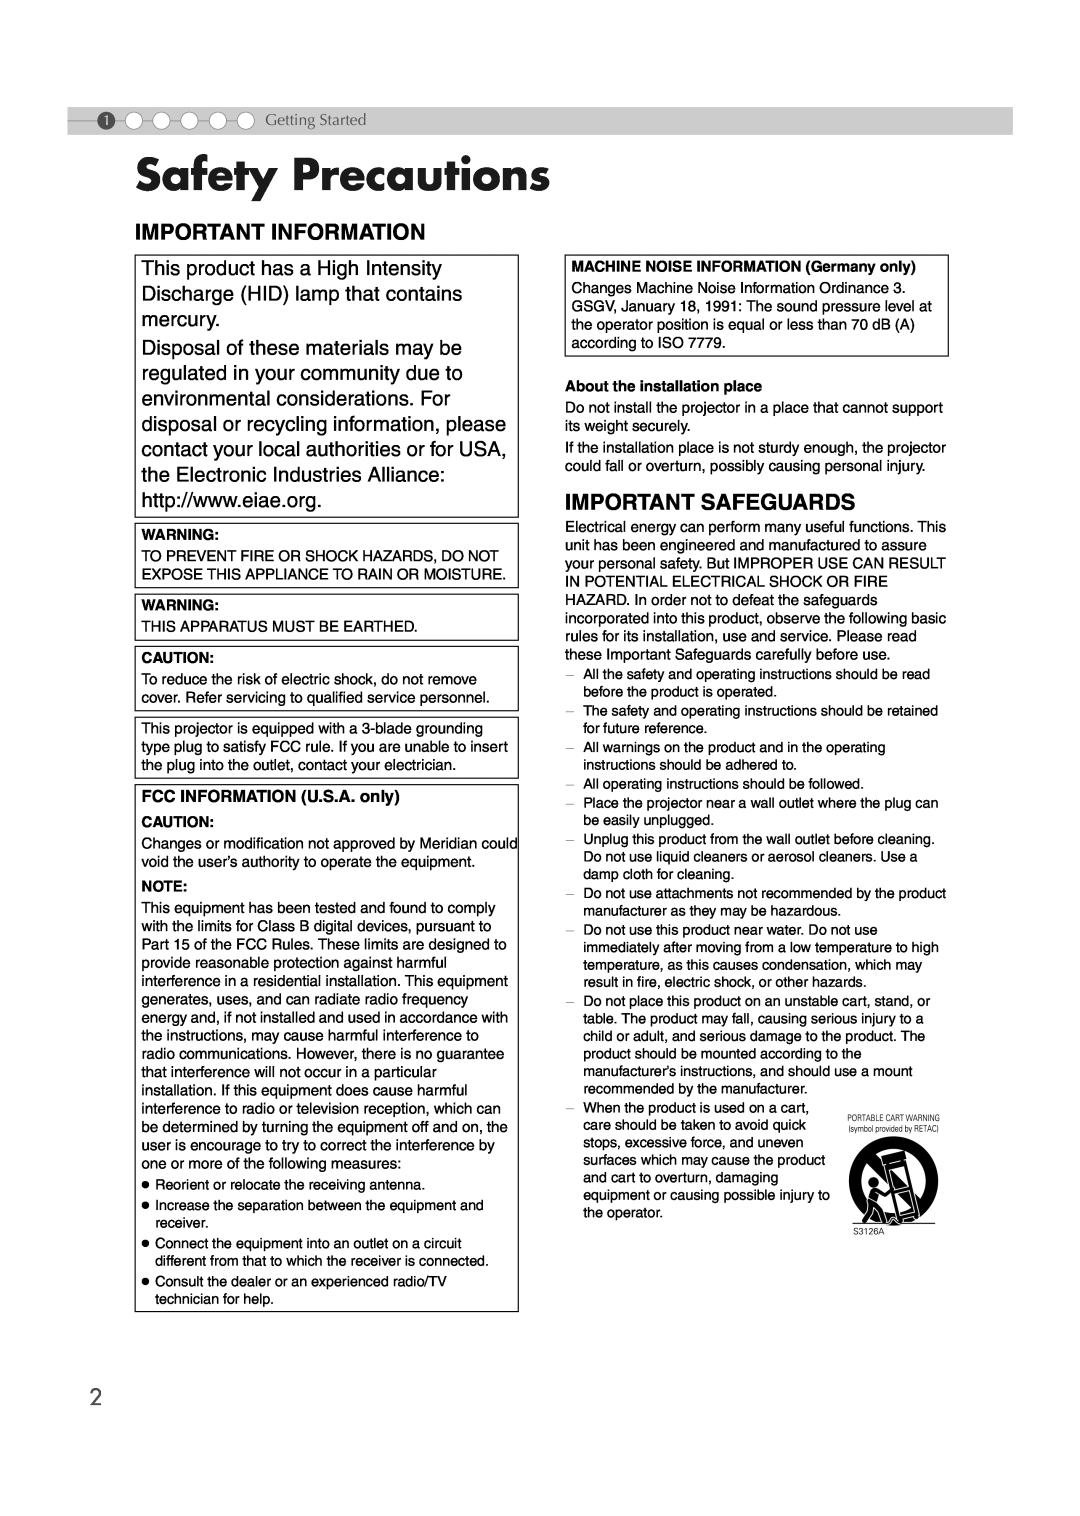 Meridian Audio MF-10 manual Safety Precautions, Important Information, Important Safeguards, FCC INFORMATION U.S.A. only 